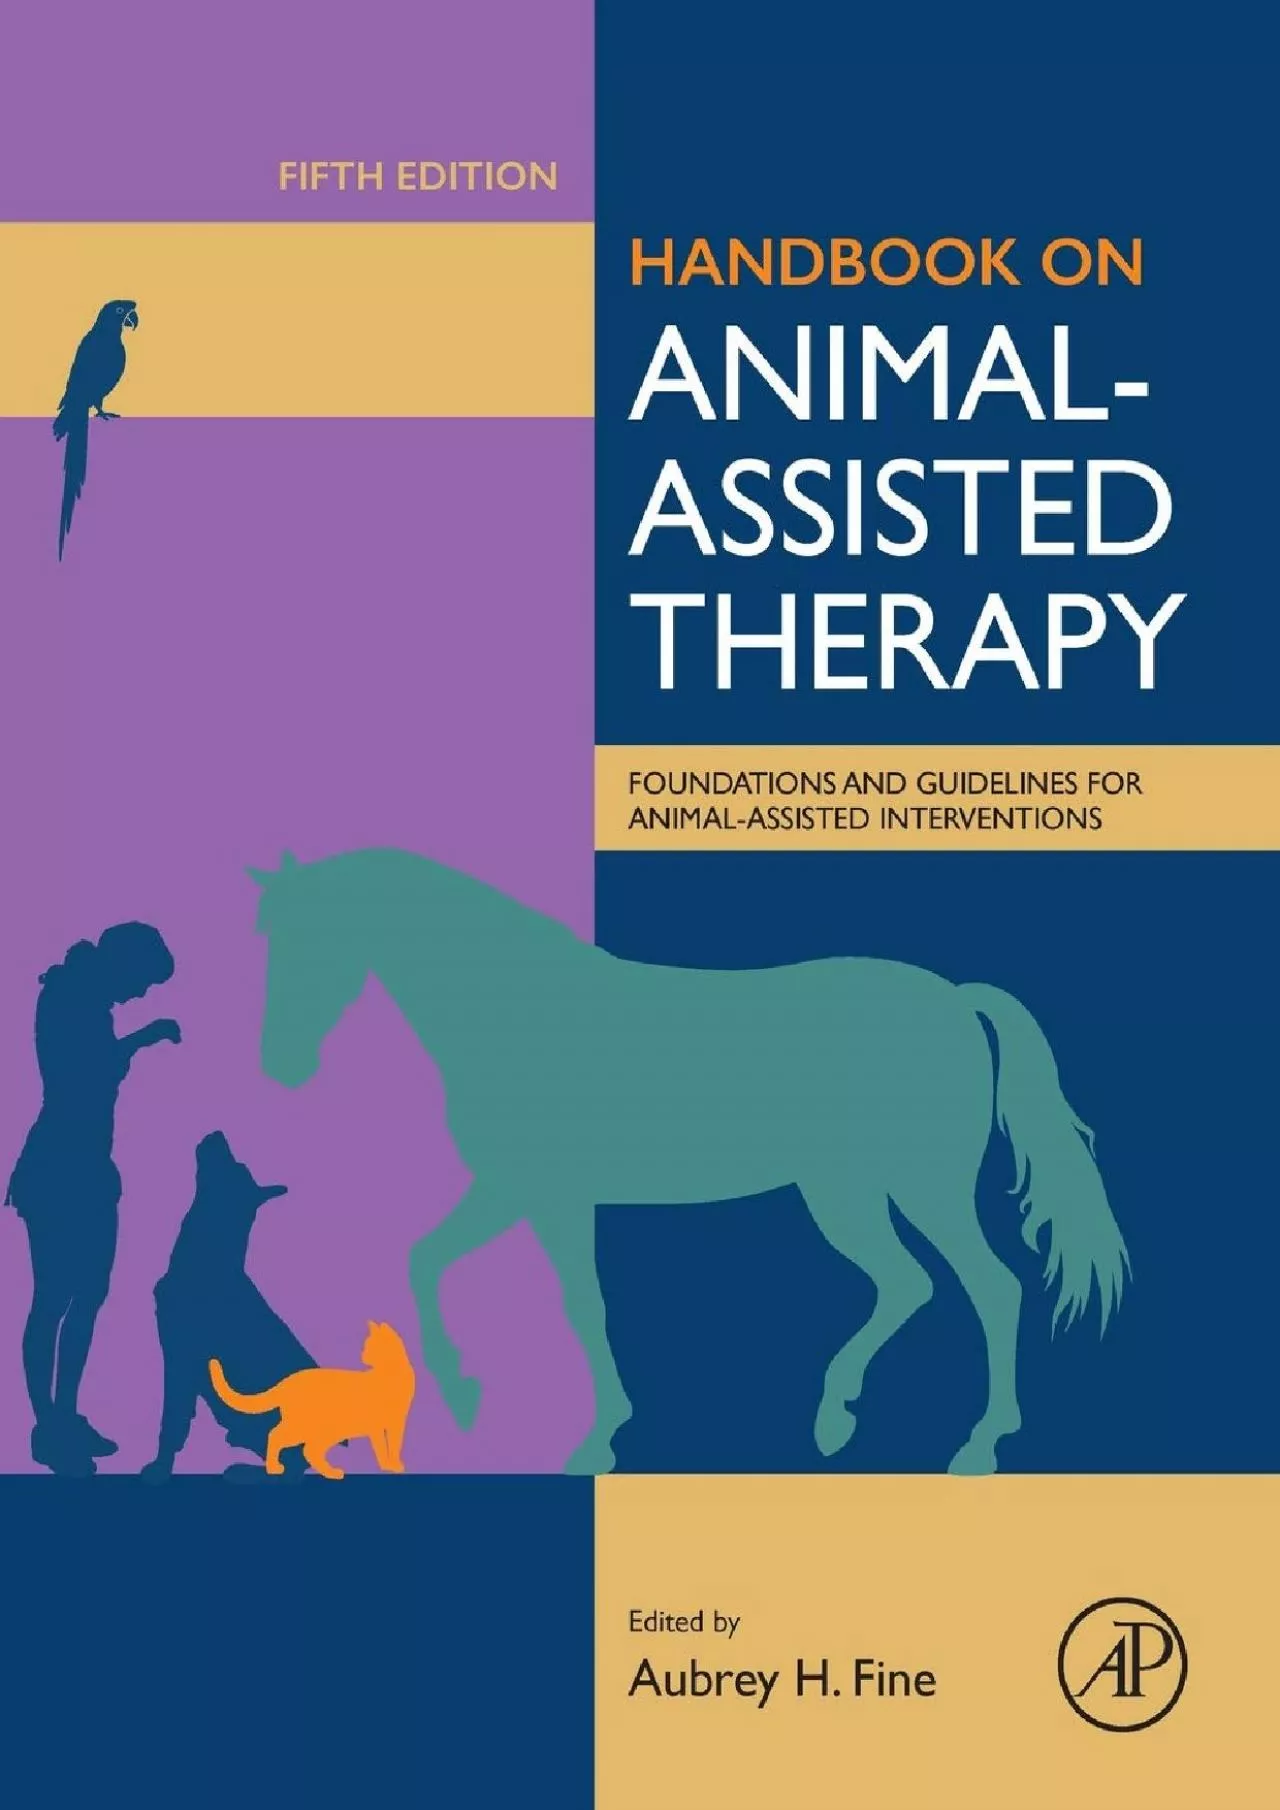 (BOOK)-Handbook on Animal-Assisted Therapy: Foundations and Guidelines for Animal-Assisted